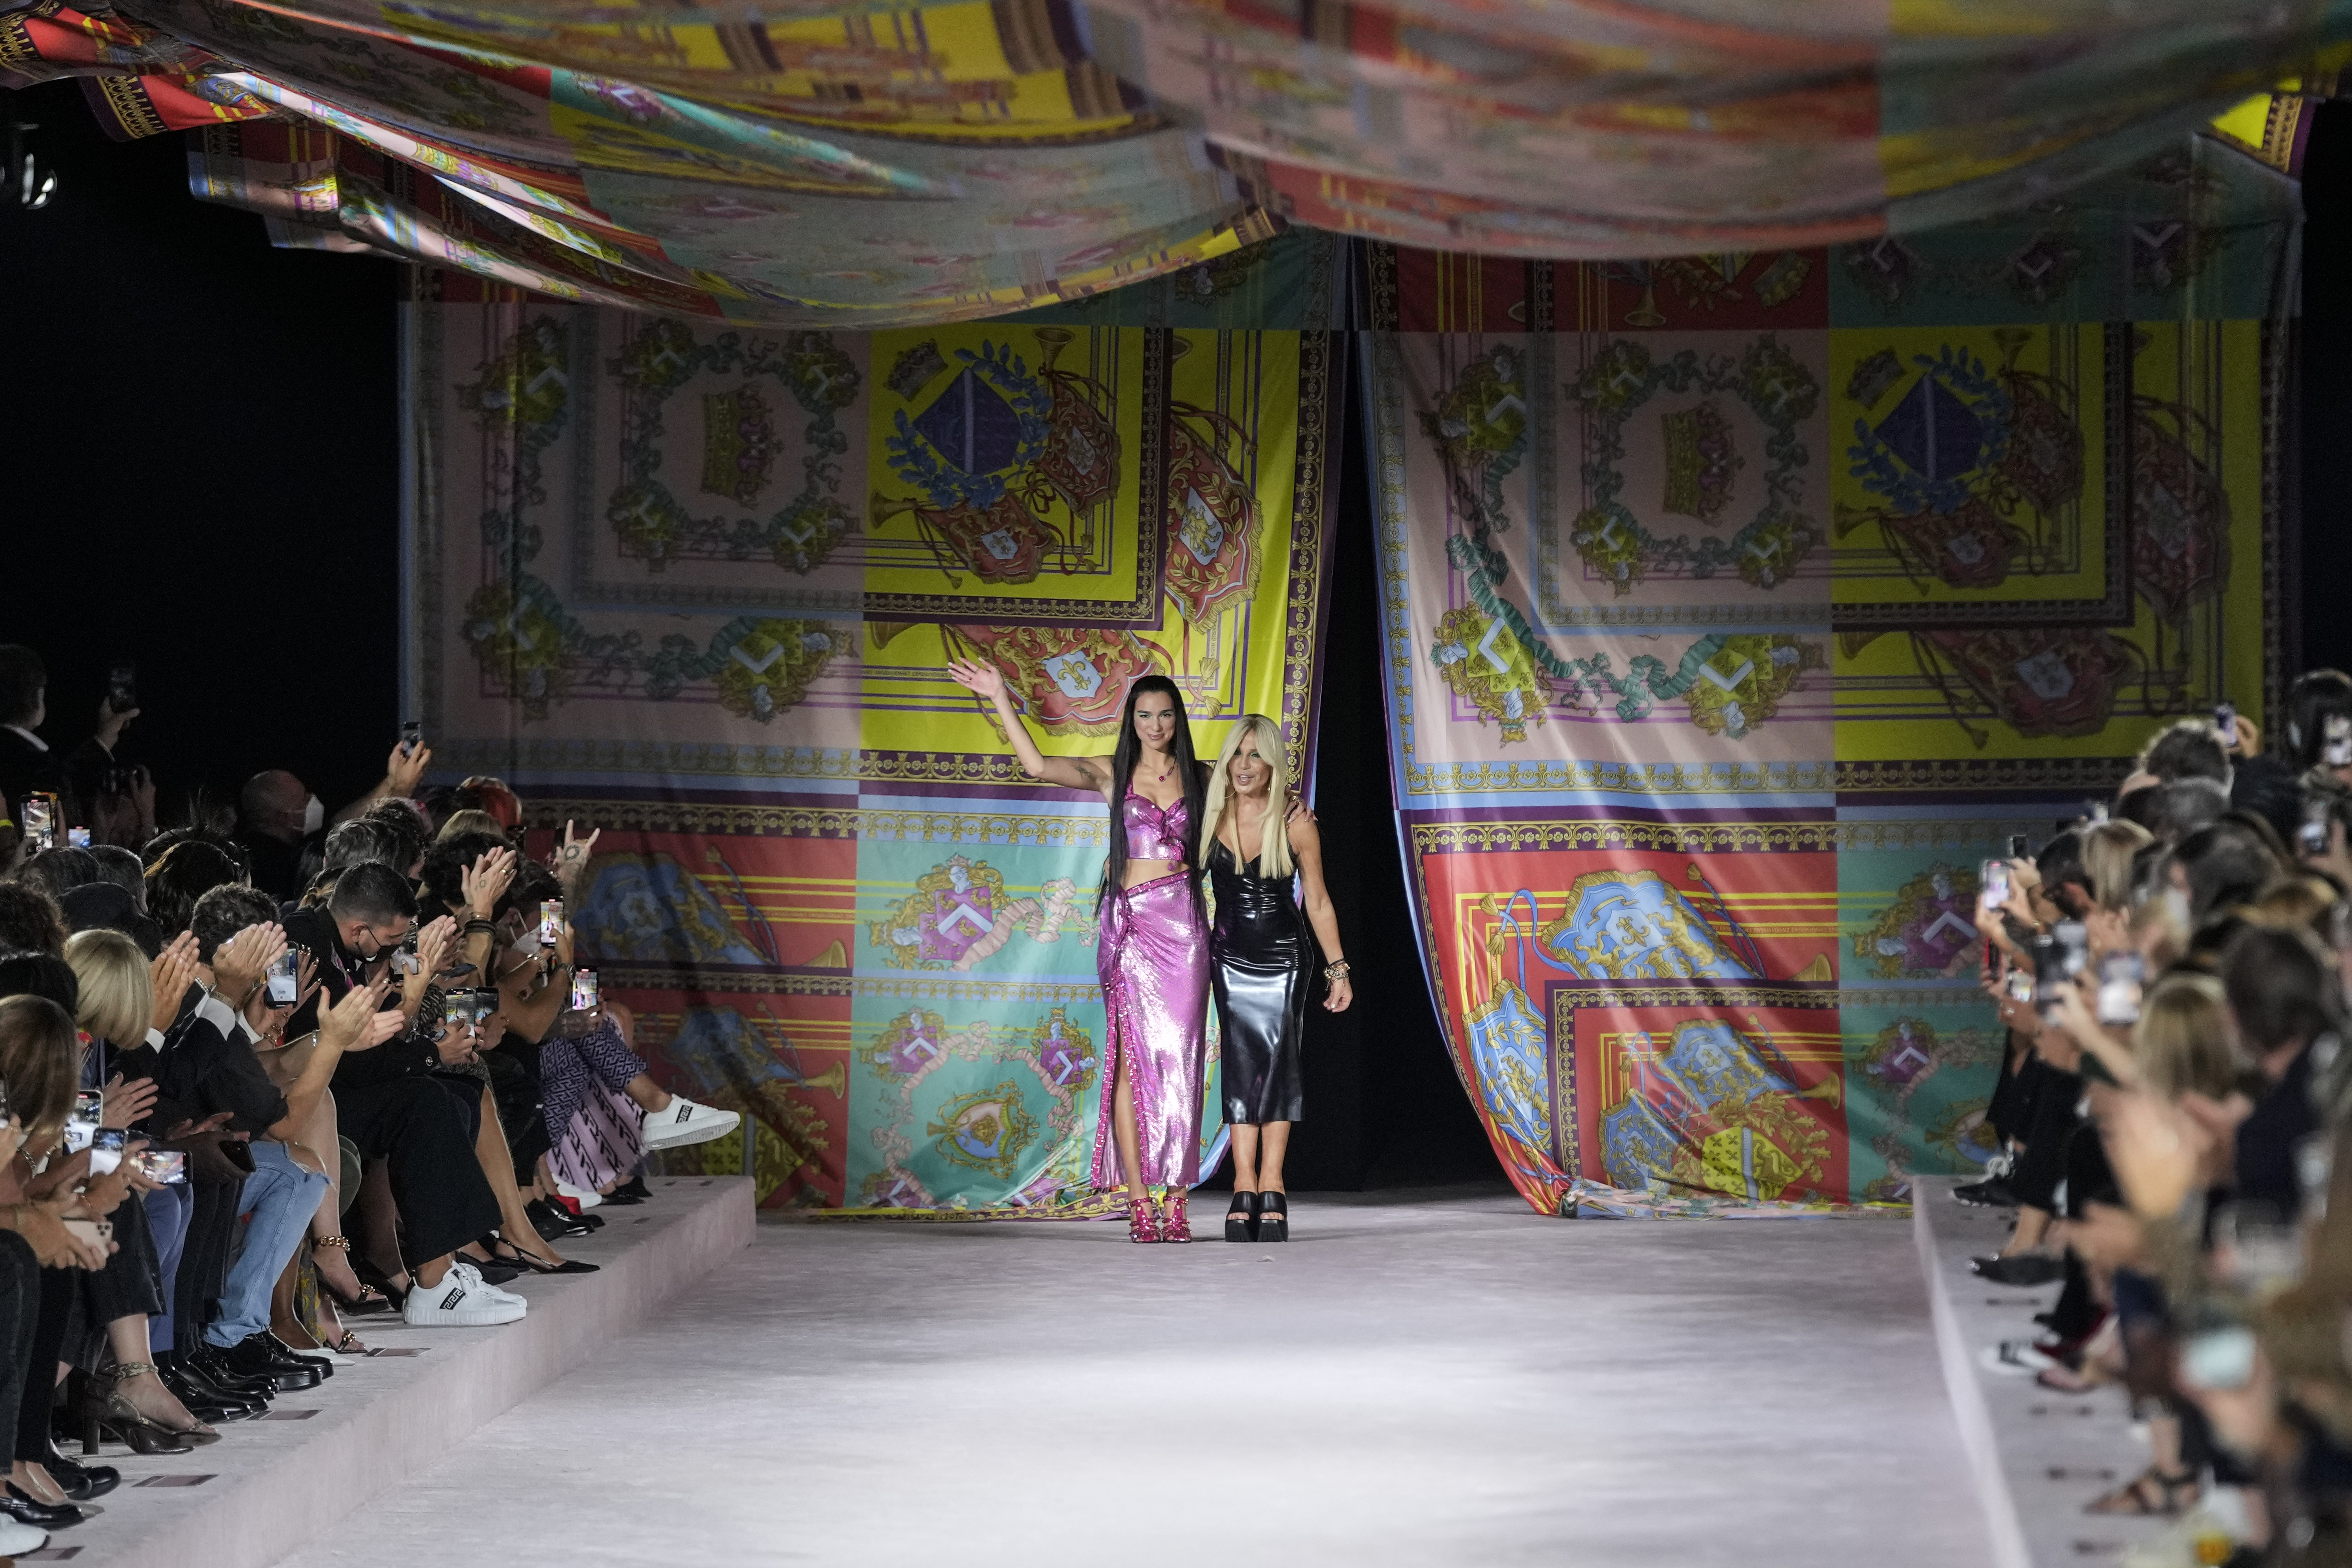 Why Prada And Louis Vuitton Are Staging Fashion Shows In New York